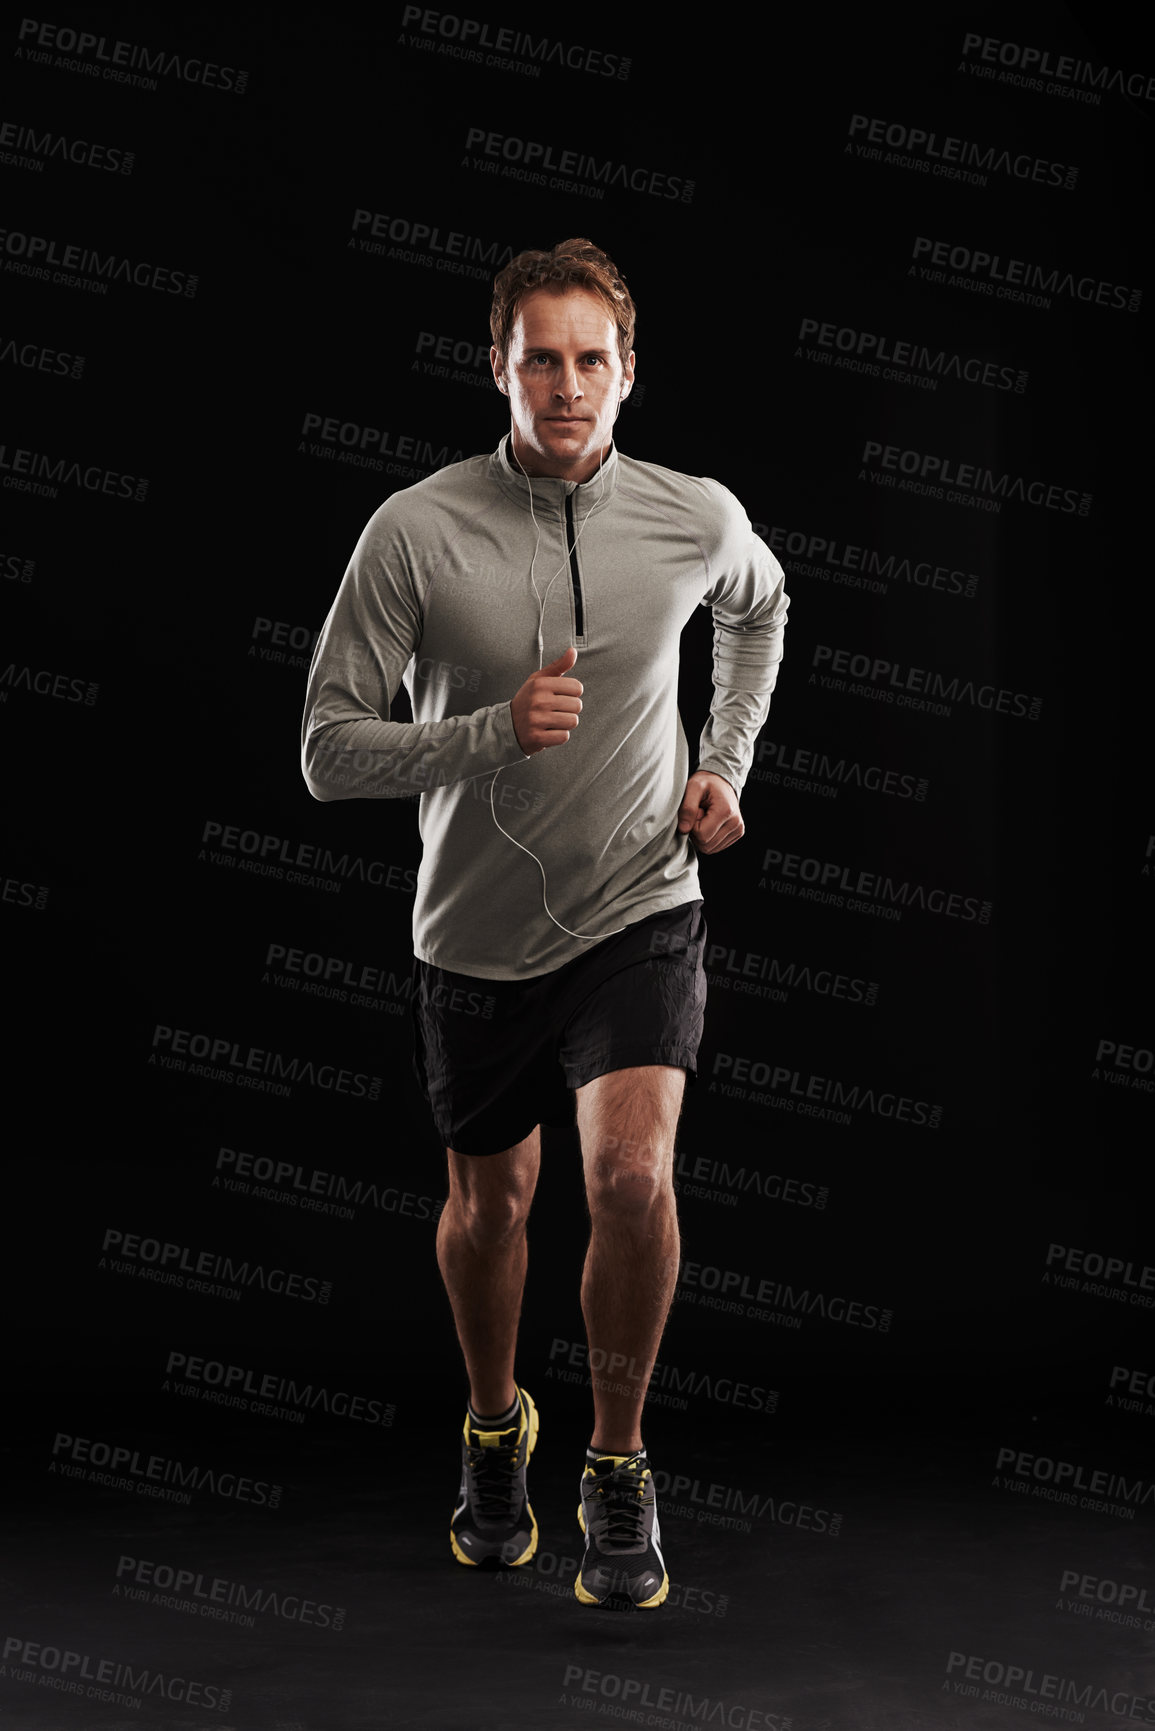 Buy stock photo Studio shot of a handsome young man in sportswear